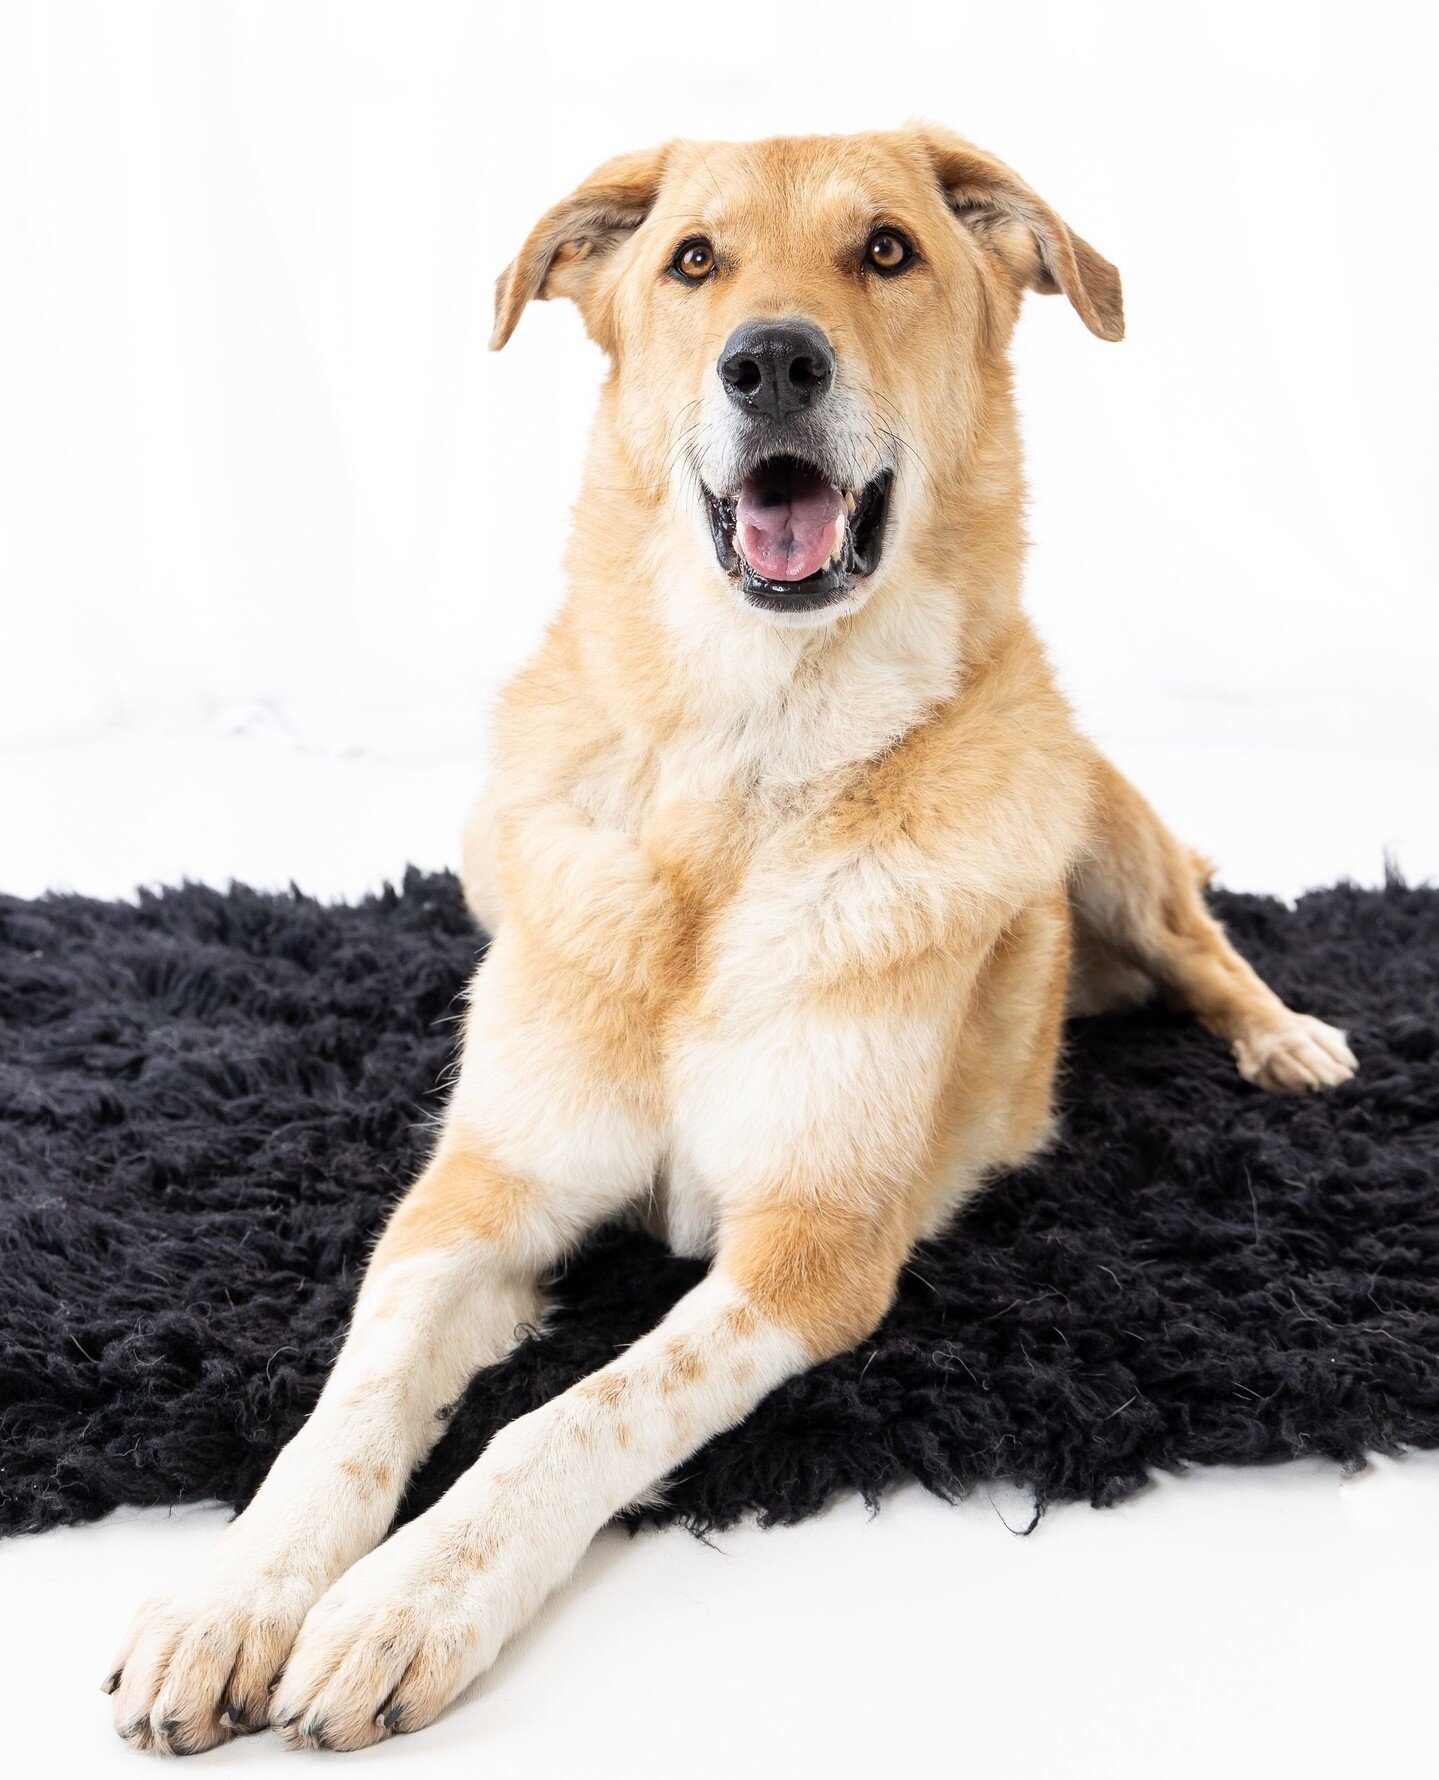 I loved working with Ariel and her mom Rachel in the studio! Ariel, a 7 year old Great Pyrenees and German Shepherd mix, is such a sweetheart and a natural for the camera. Her smile is contagious! ⁠
⁠
It's always fun to capture clients with the peopl